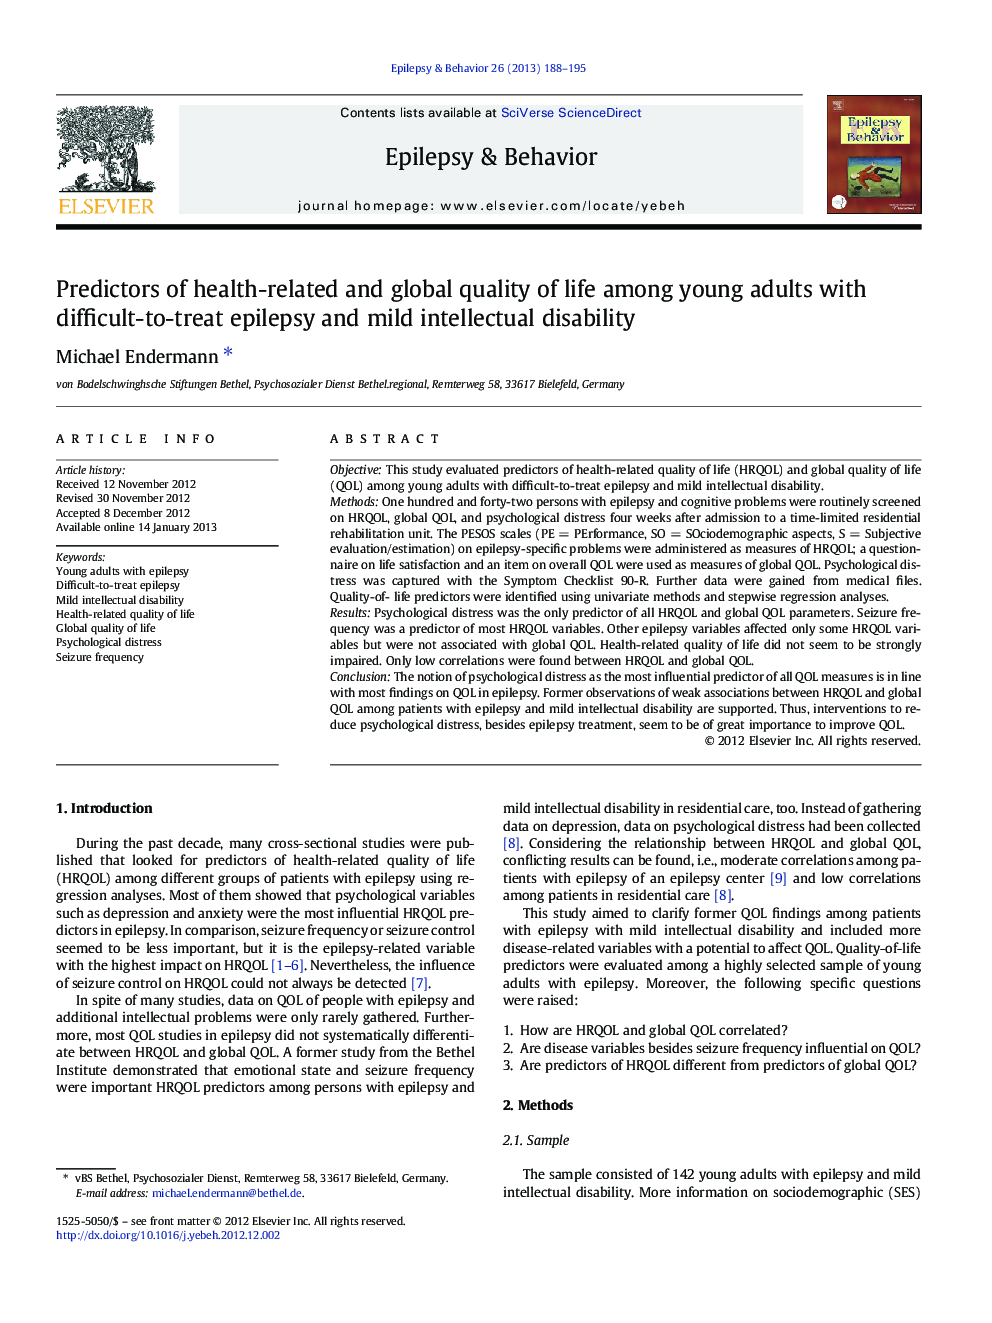 Predictors of health-related and global quality of life among young adults with difficult-to-treat epilepsy and mild intellectual disability